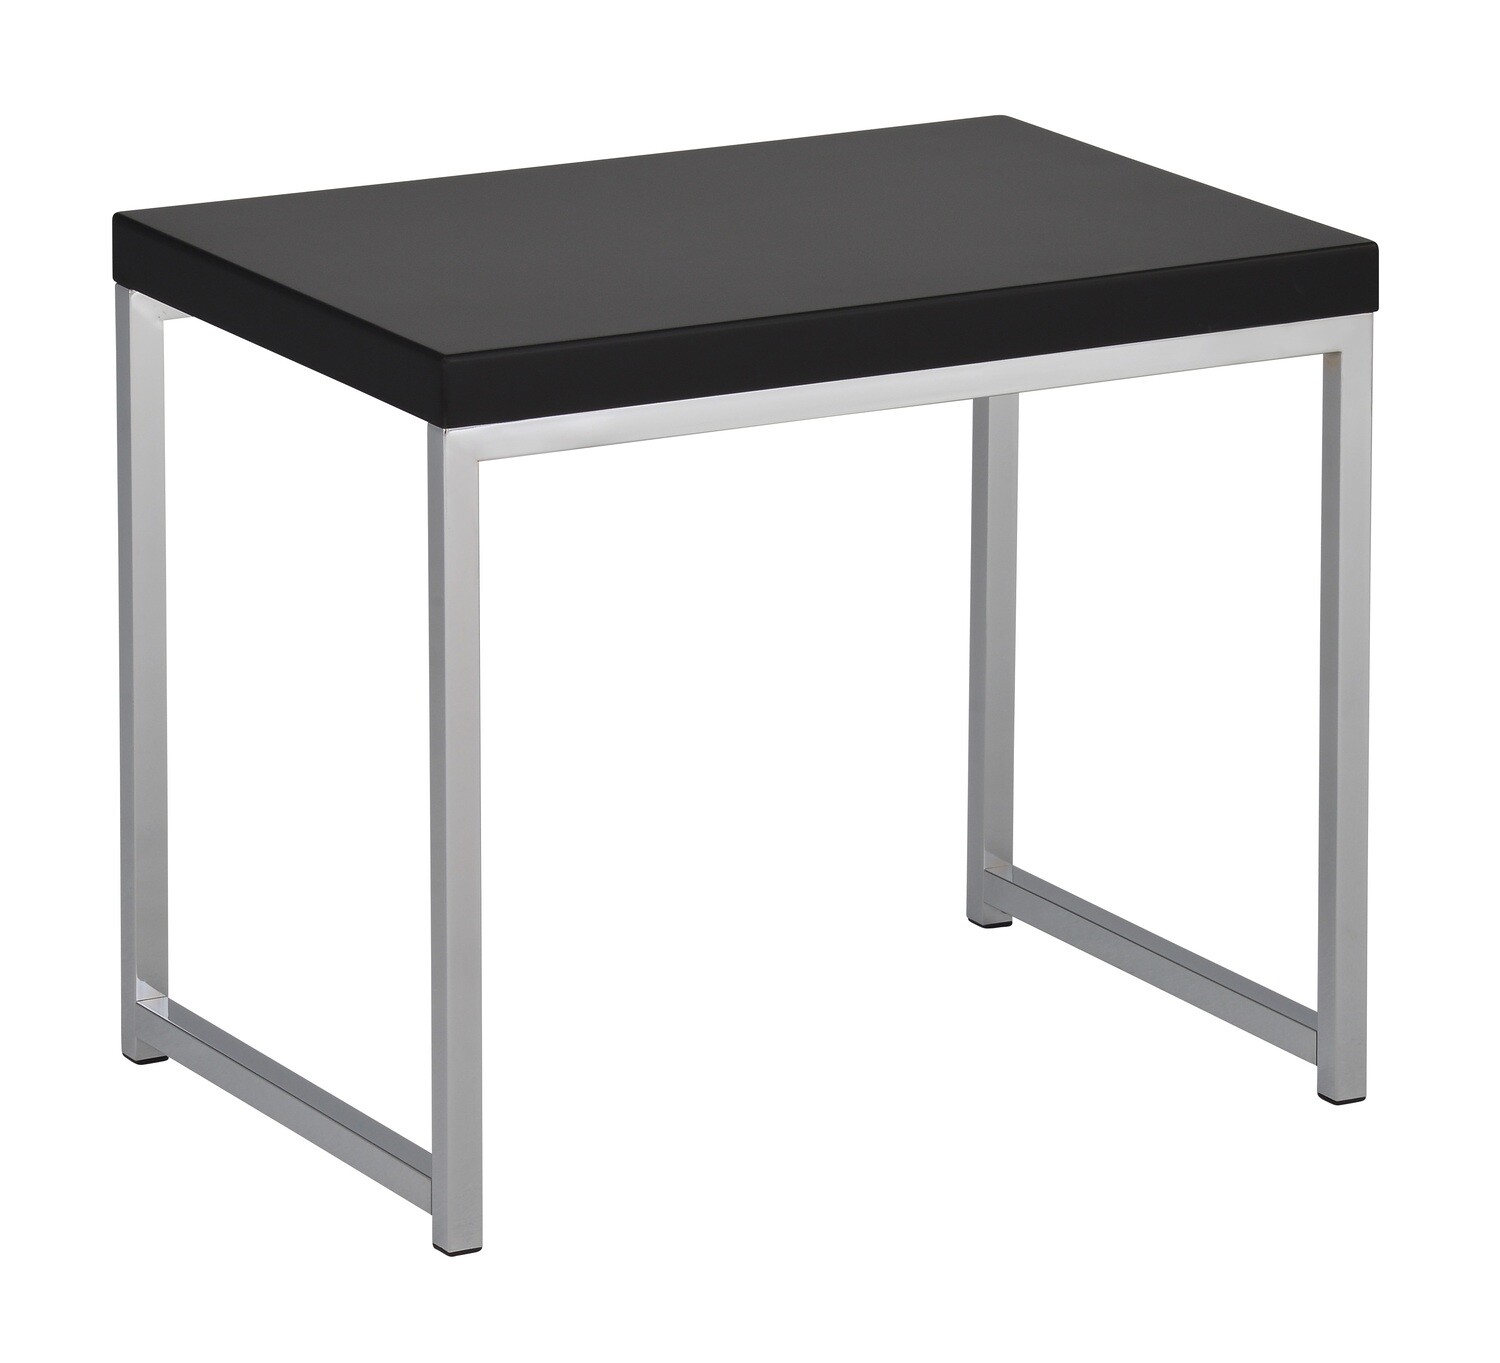 Wall Street End Table with Chrome Frame and Espresso Finish Wood Top or Black or White